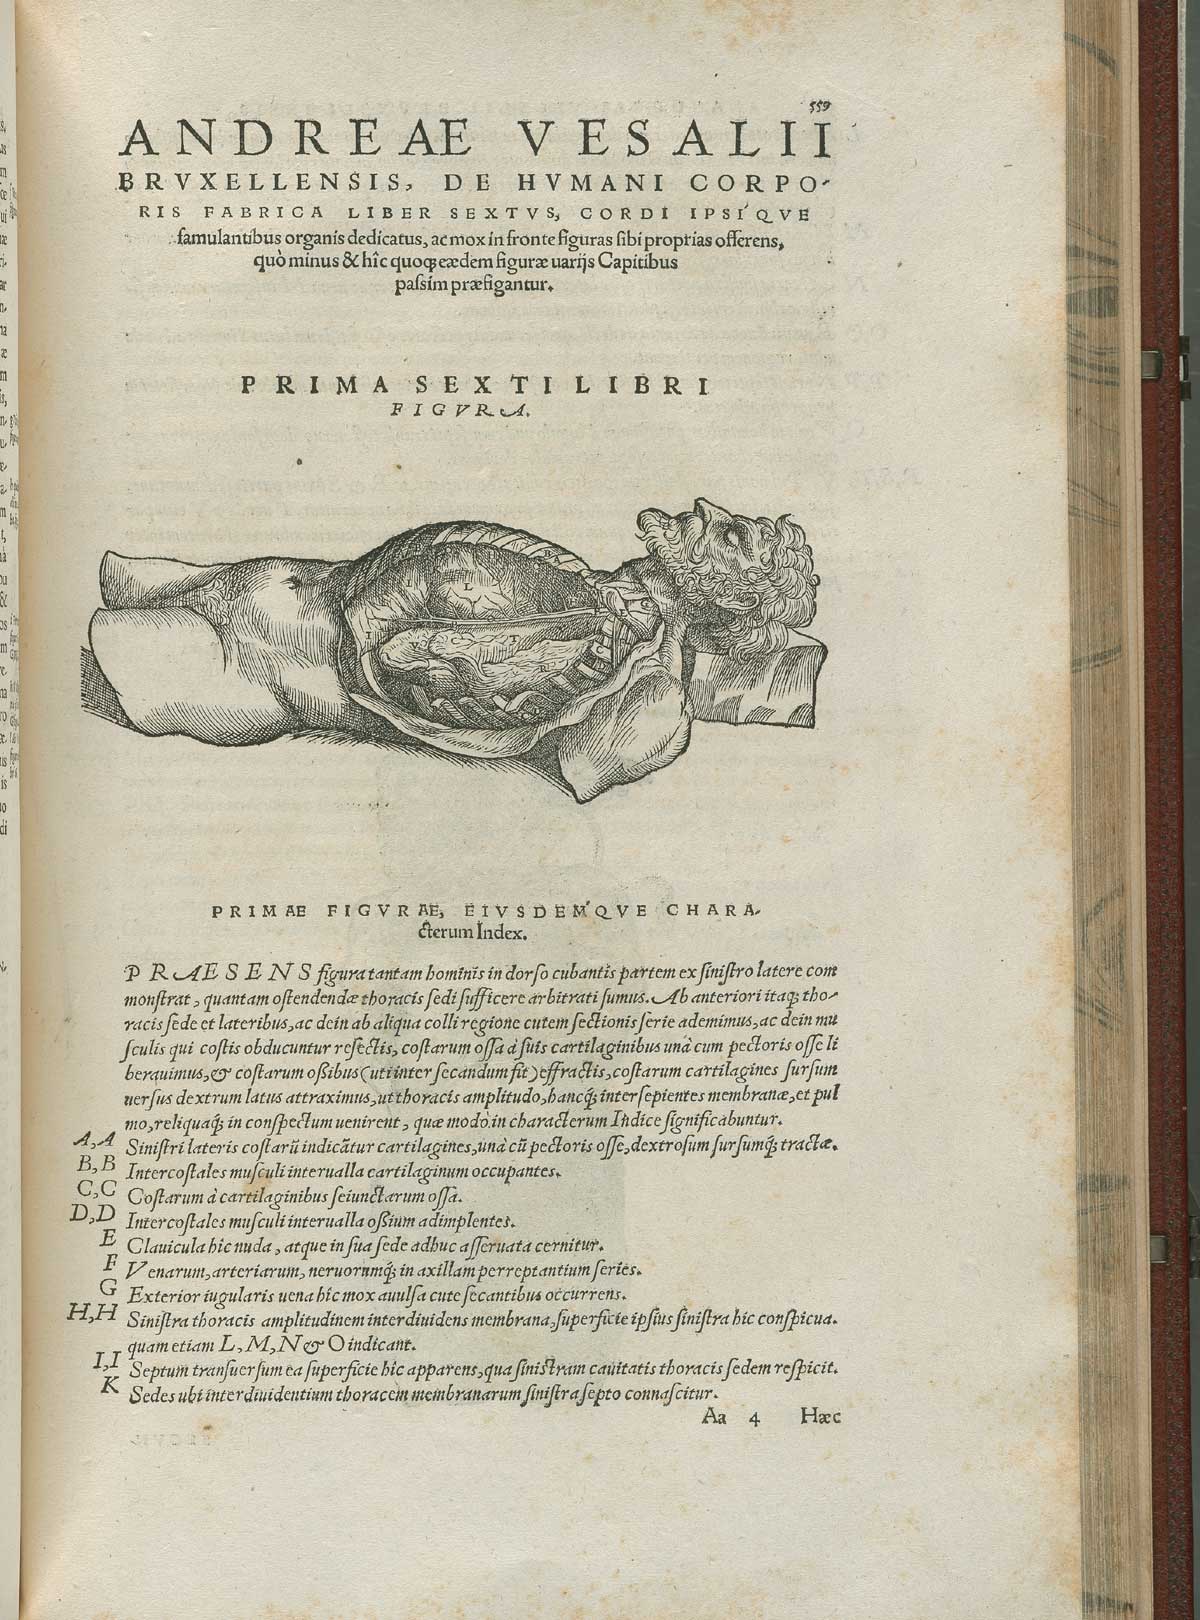 Page 559 of Andreas Vesalius' De corporis humani fabrica libri septem, featuring the illustrated woodcut of the side view of a male figure, the thoracic cavity exposed.